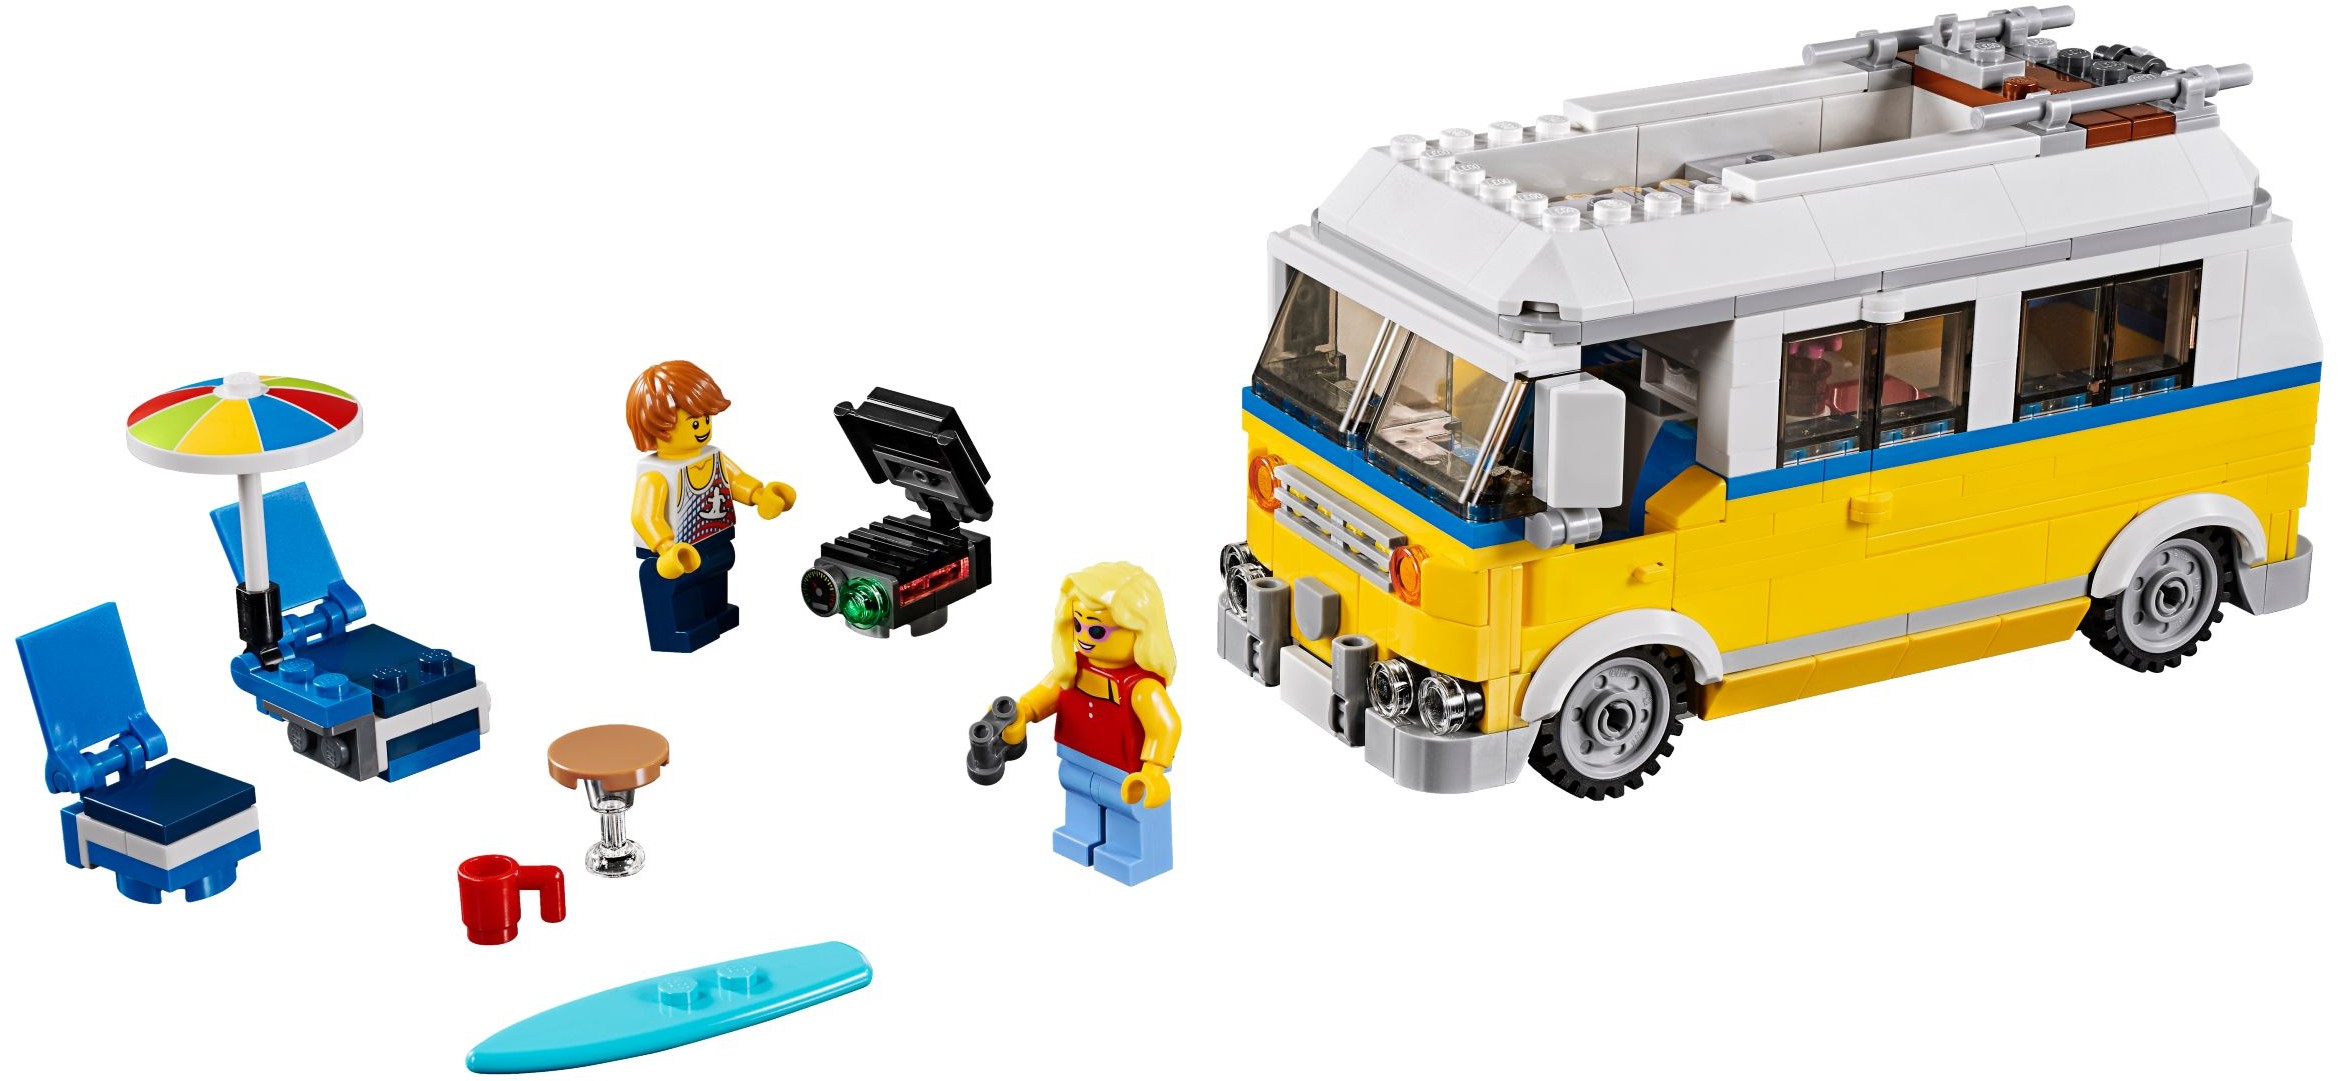 LEGO (R) Creator New Product Information